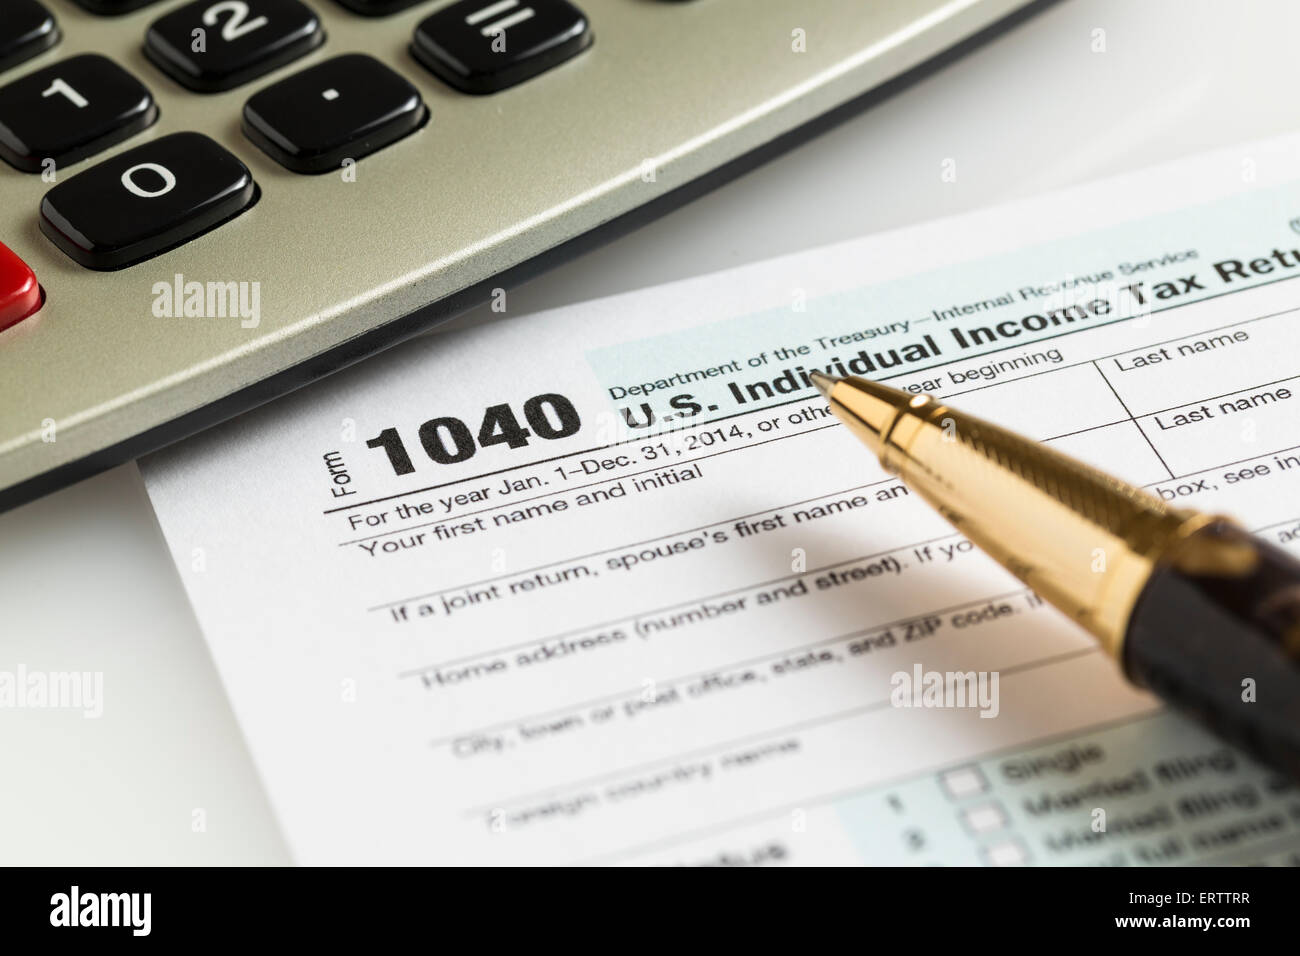 USA tax form 1040 for year 2014 with a pen and calculator illustrating completion of tax forms for the IRS Stock Photo